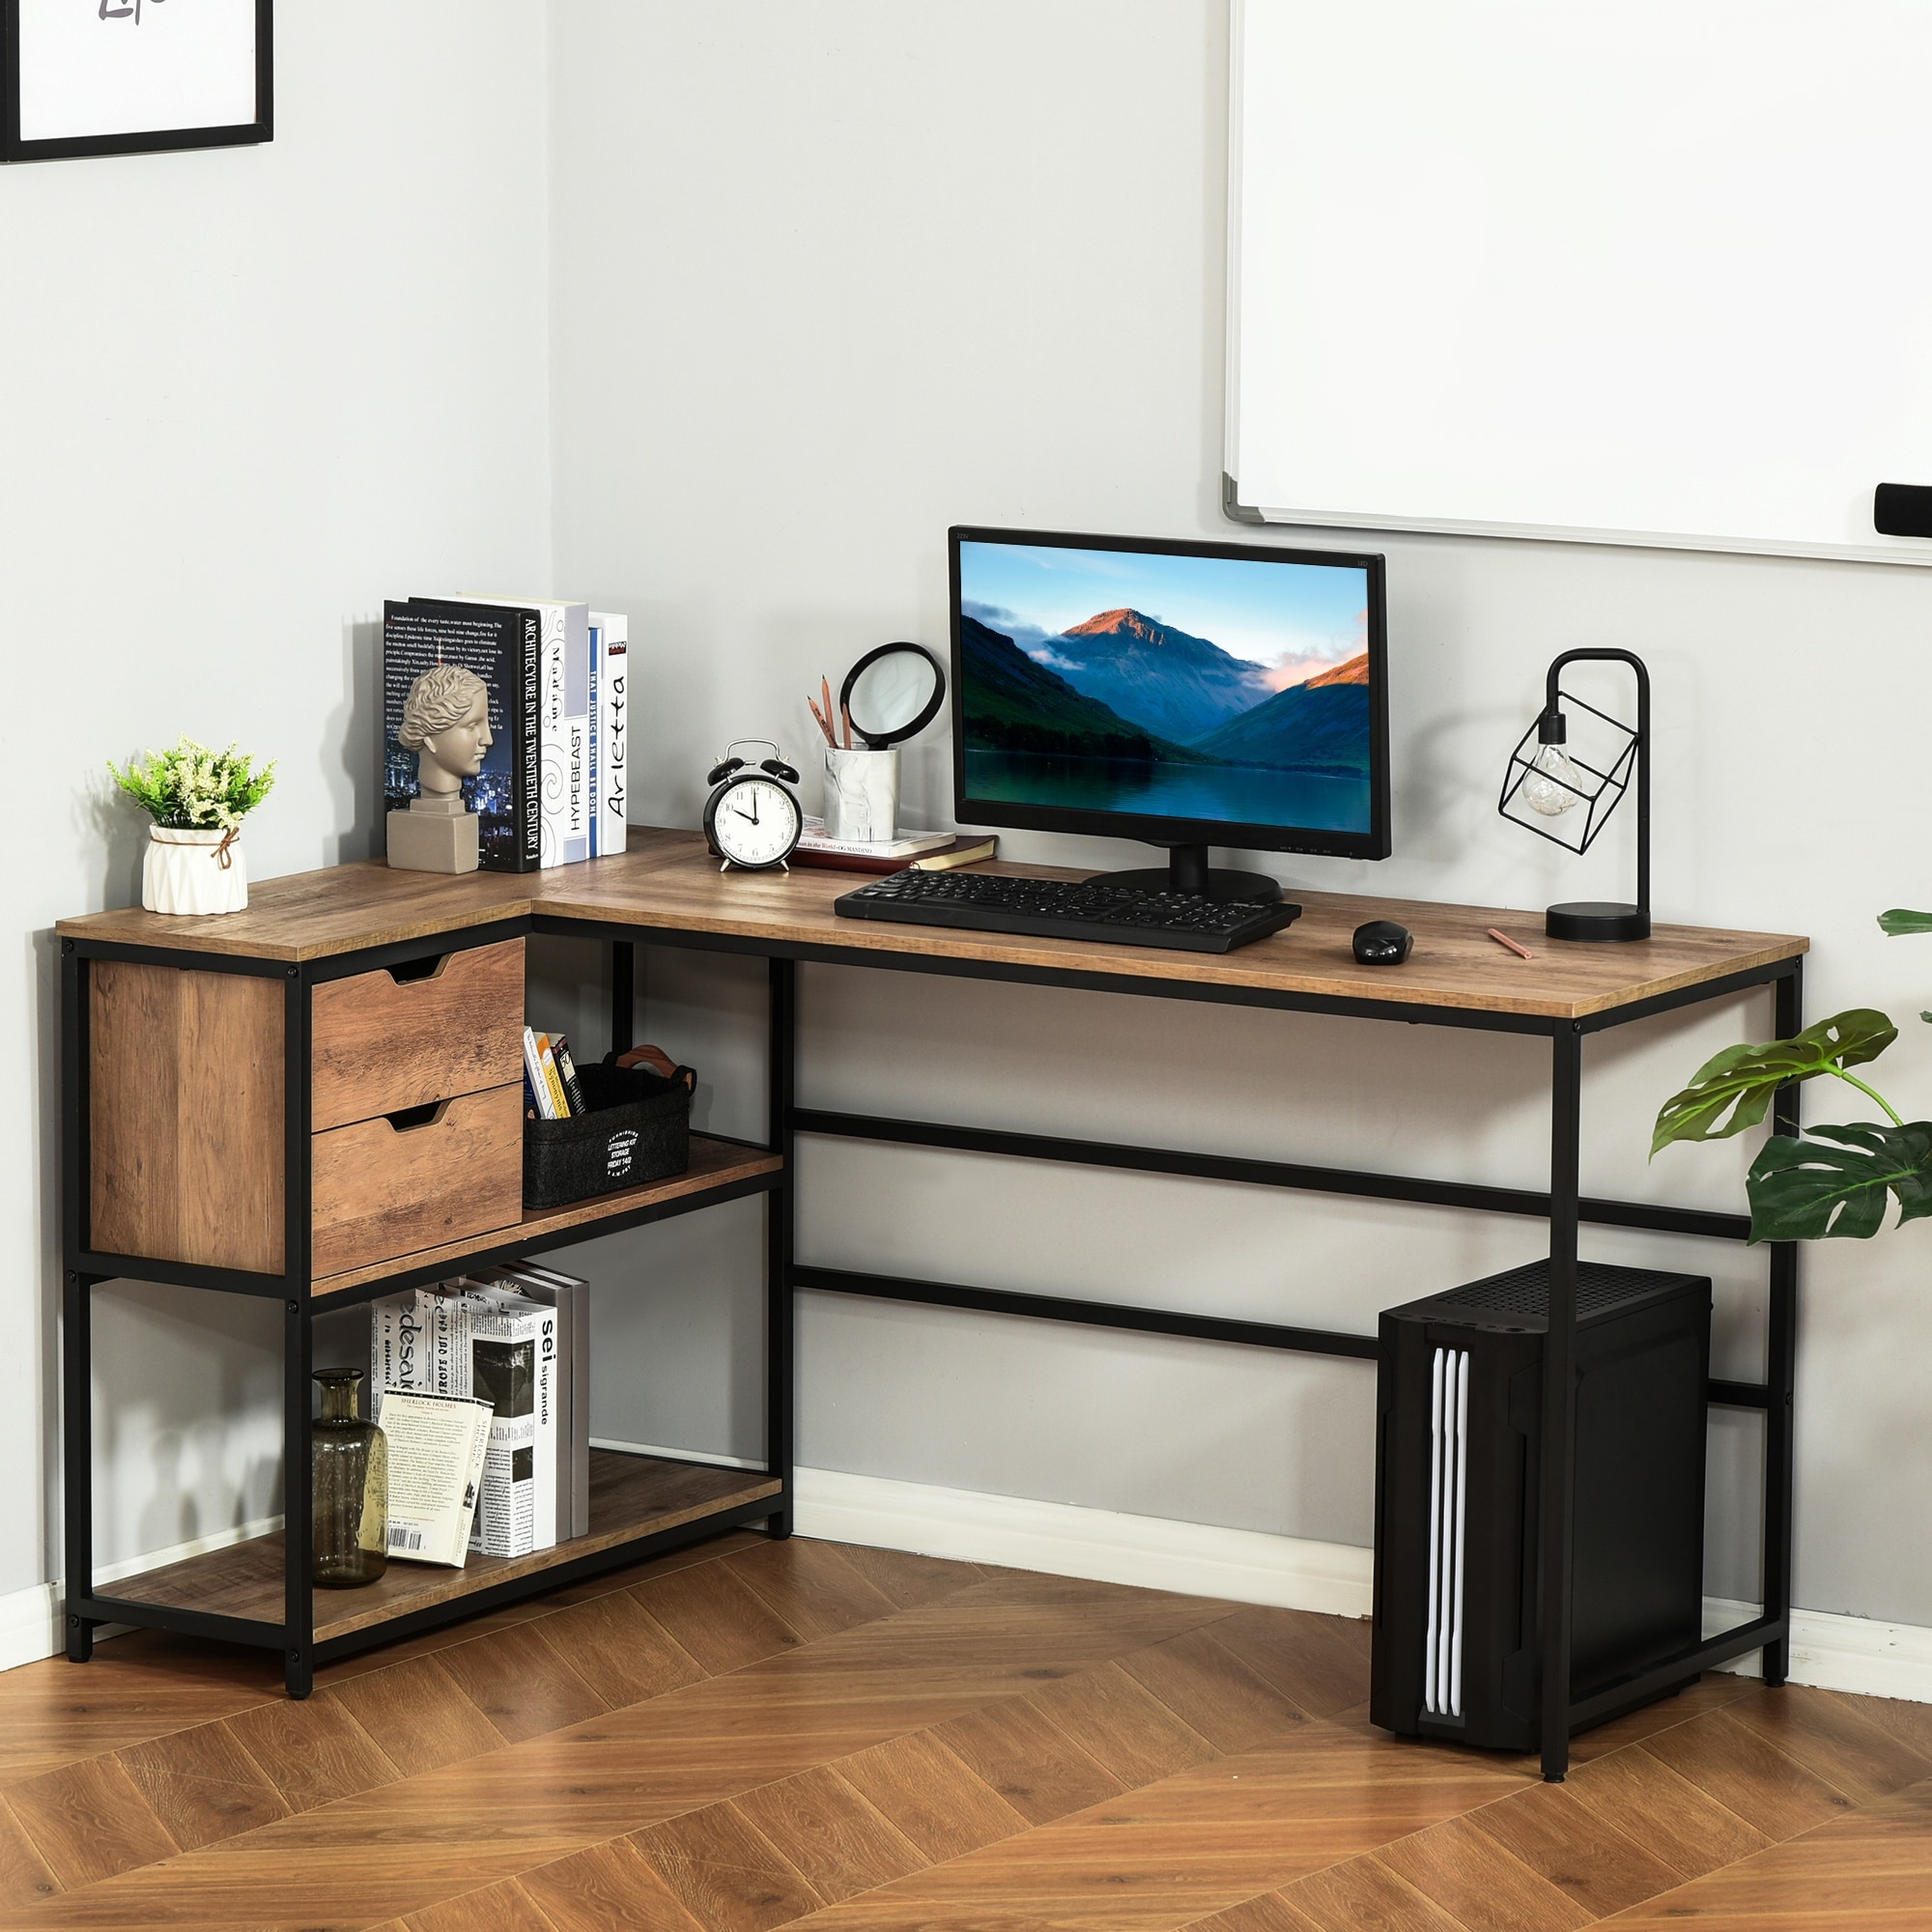 https://ak1.ostkcdn.com/images/products/is/images/direct/b1cfabb565c276781e63c2ea5369828fc47450ad/HOMCOM-L-Shaped-Home-Office-Writing-Desk-with-Storage-Shelf%2C-Drawer%2C-Brown.jpg